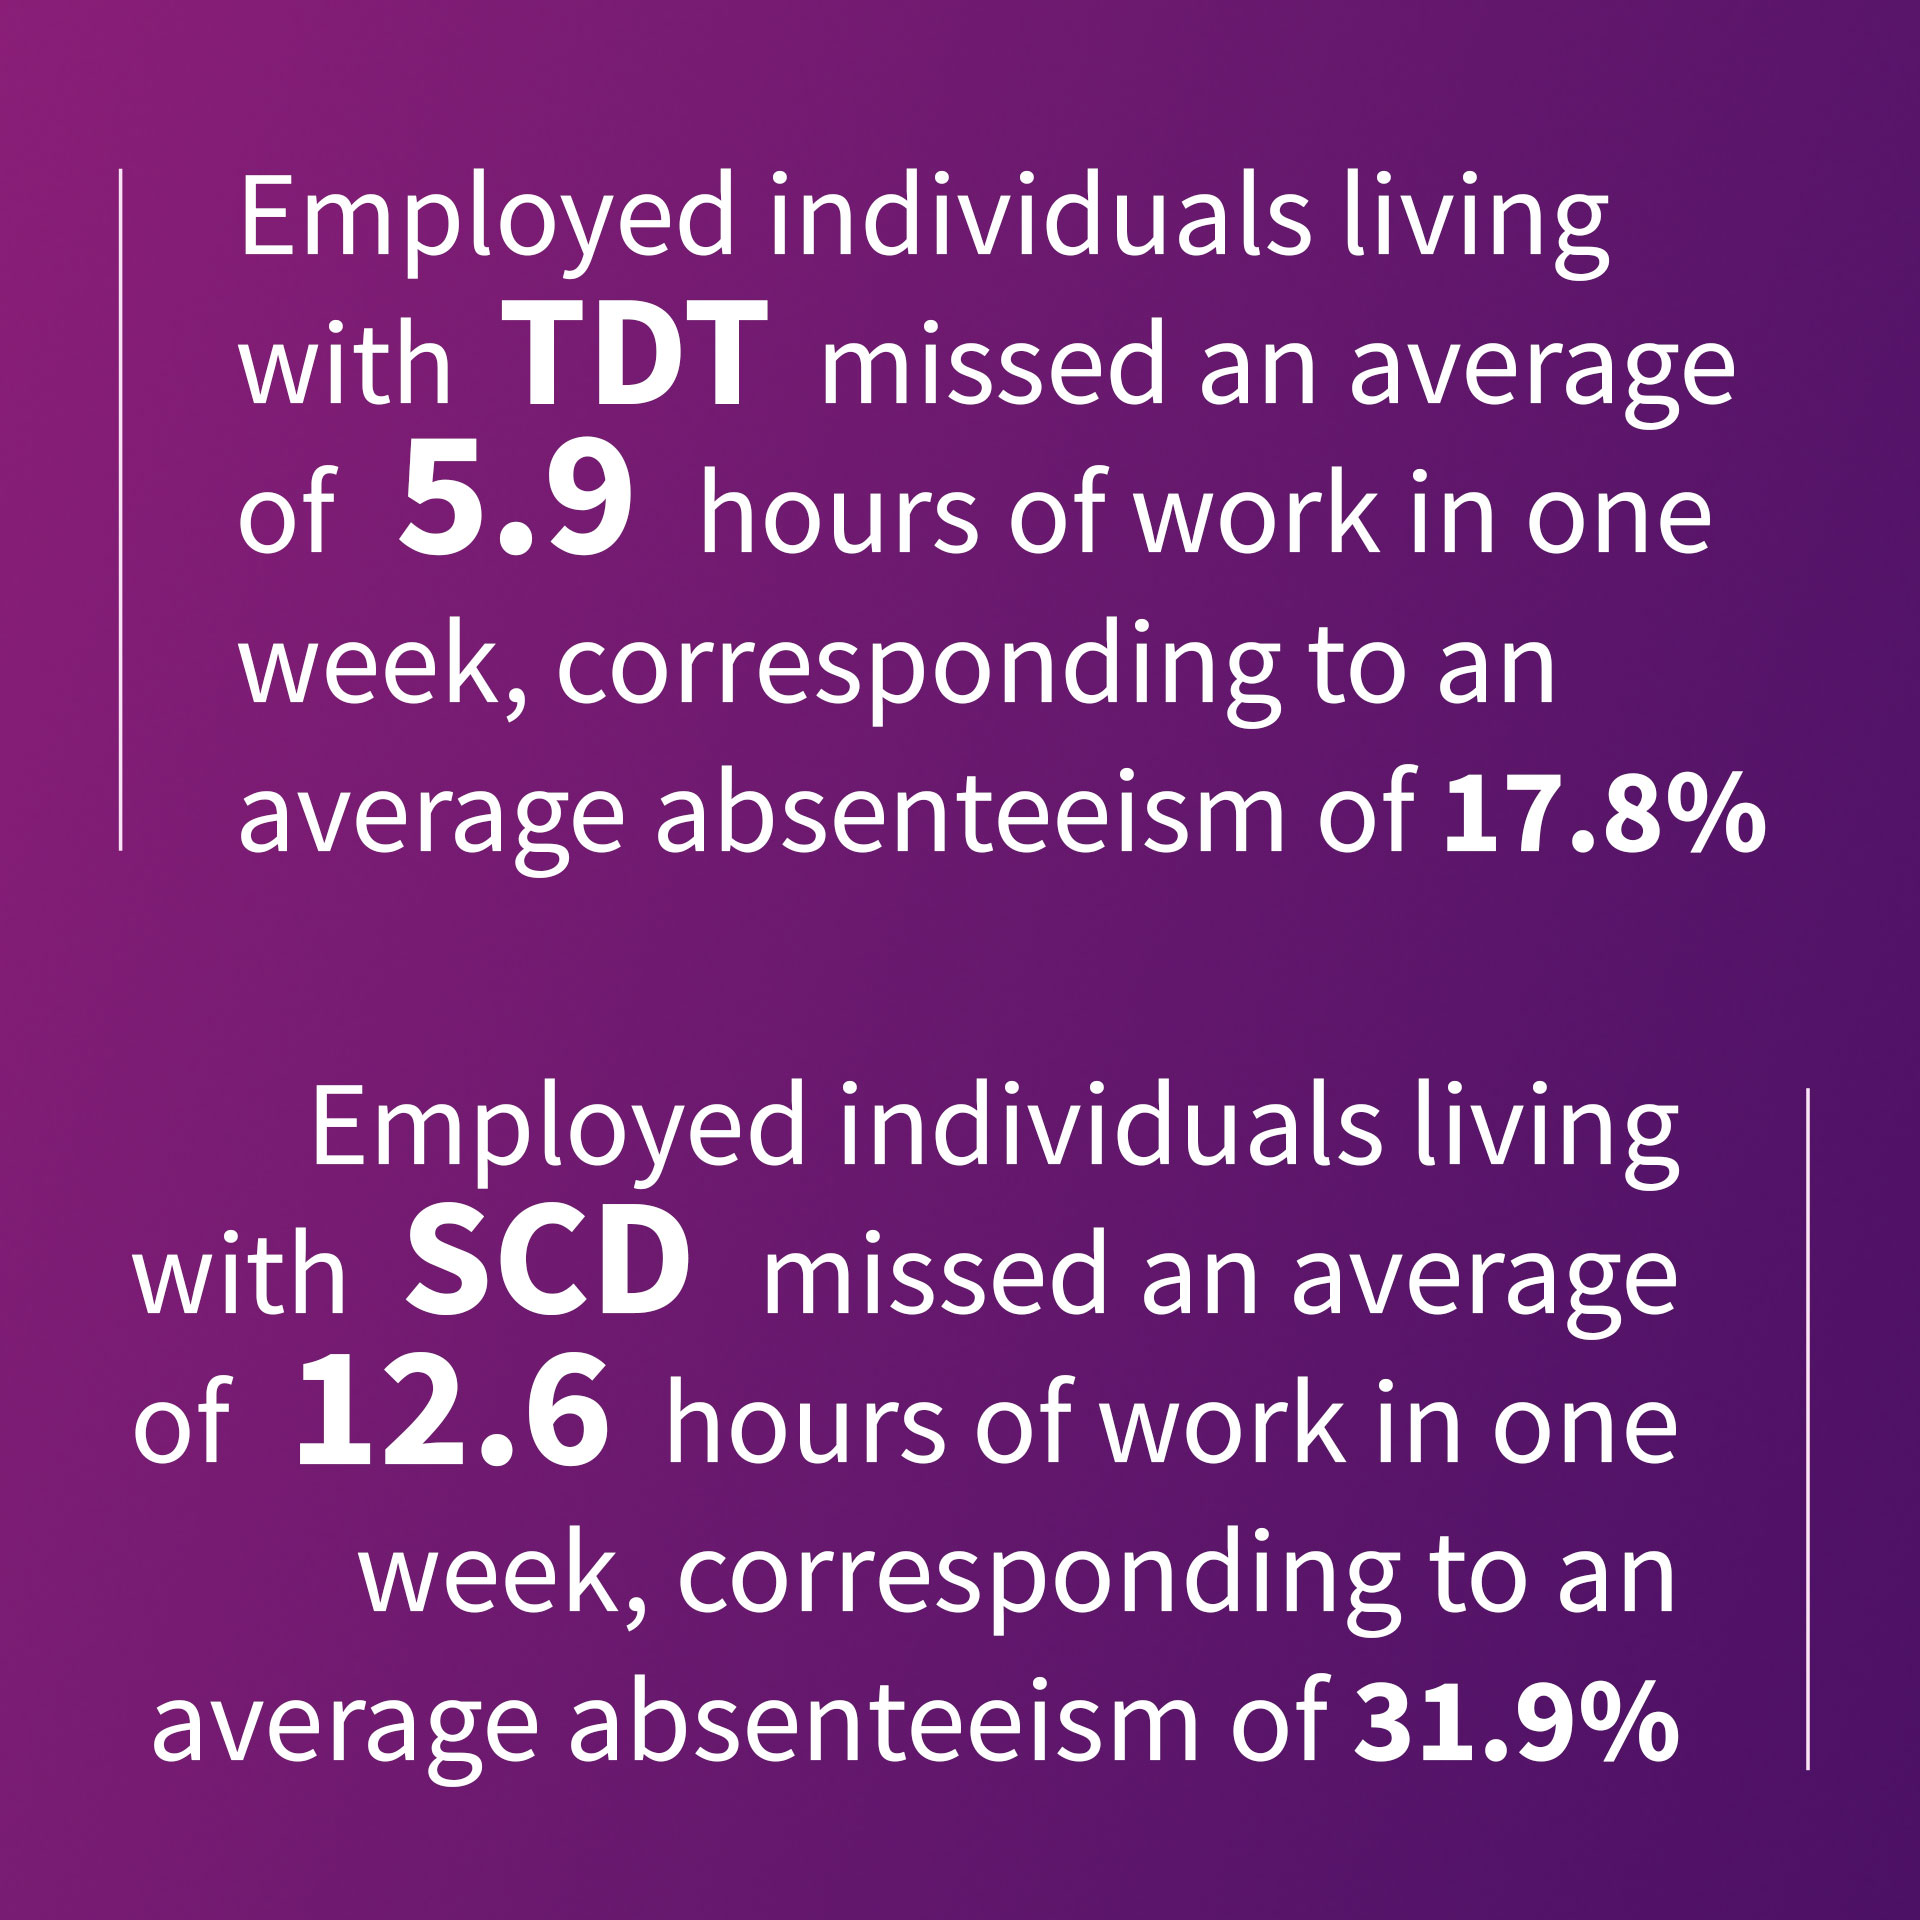 An infographic stating: Employed individuals living with TDT missed an average of 5.9 hours of work in one week due to TDT, corresponding to an average absenteeism of 17.8%. Employed individuals living with SCD missed an average of 12.6 hours of work in one week due to SCD, corresponding to an average absenteeism rate of 31.9%  